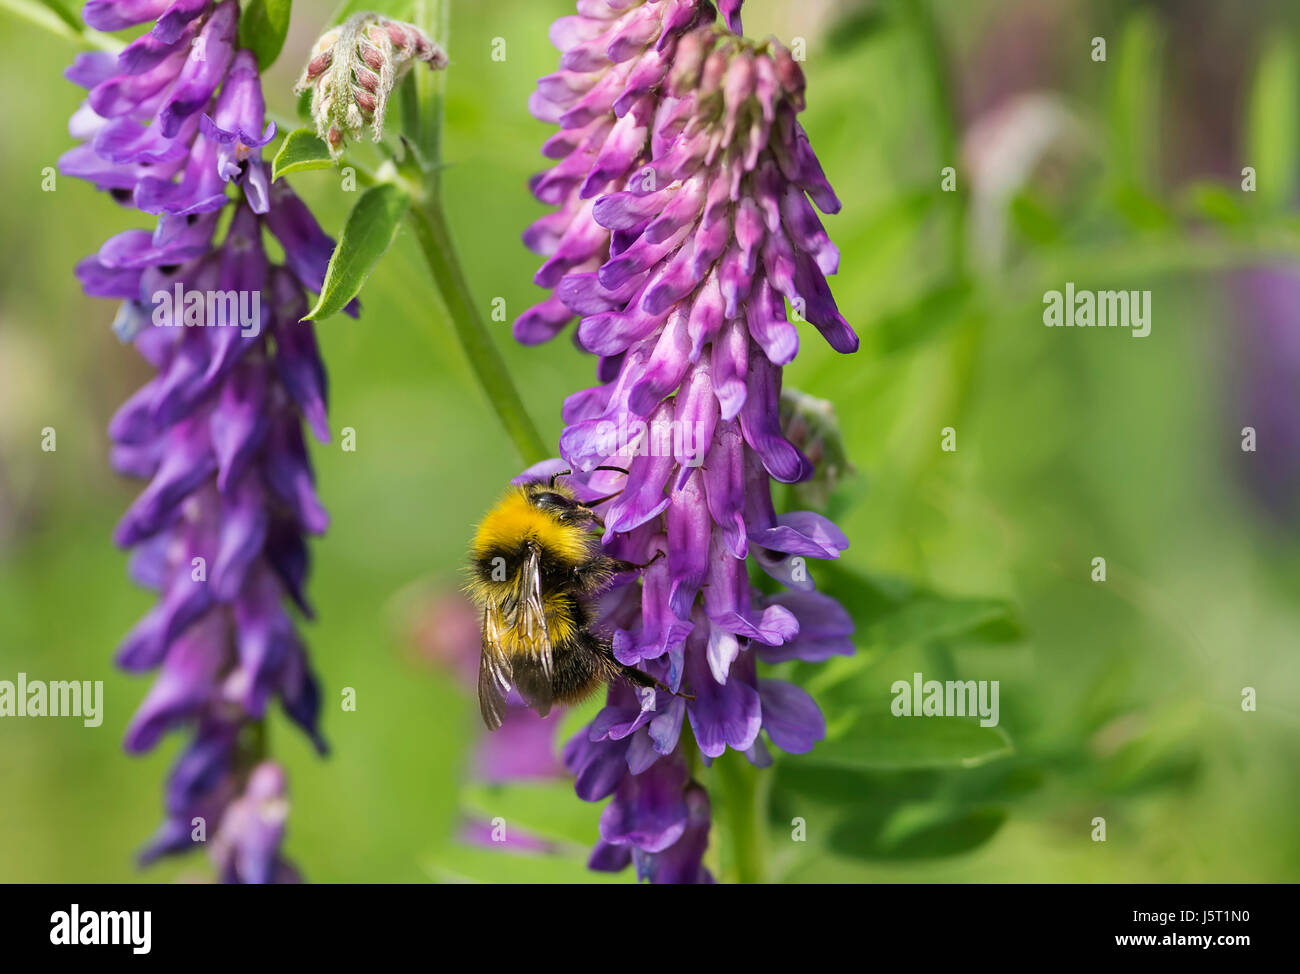 Tufted vetch, Vicia cracca, Bumble bee Bombus terrestris, pollinating purple flower in grassy area of woodland. Stock Photo